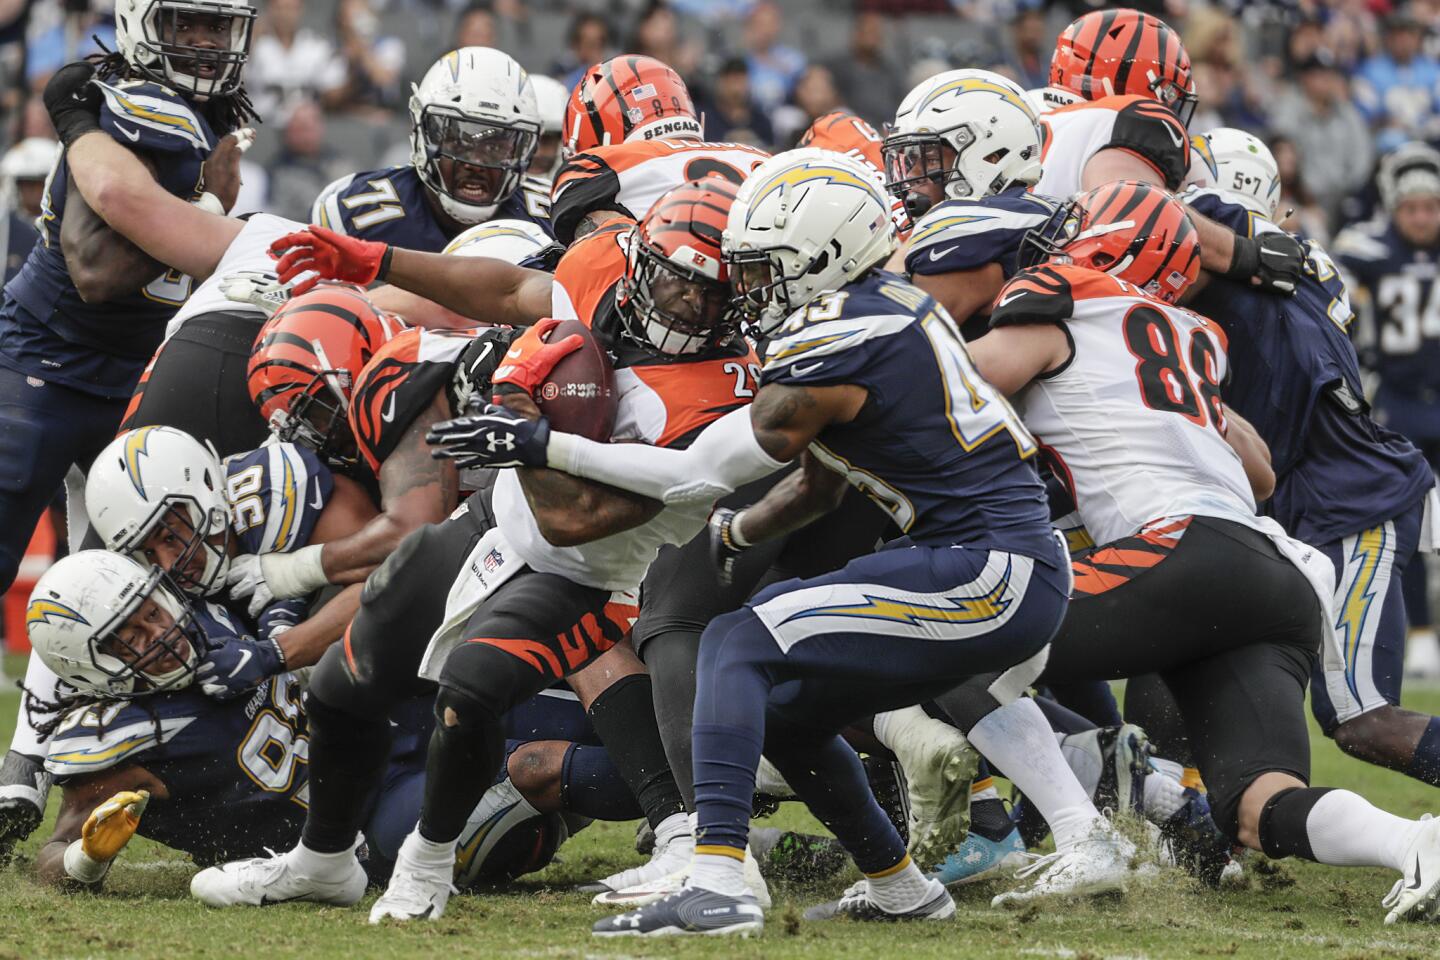 Bengals running back Joe Mixon is stopped short of a first down by Chargers cornerback Michael Davis during the secnod half.